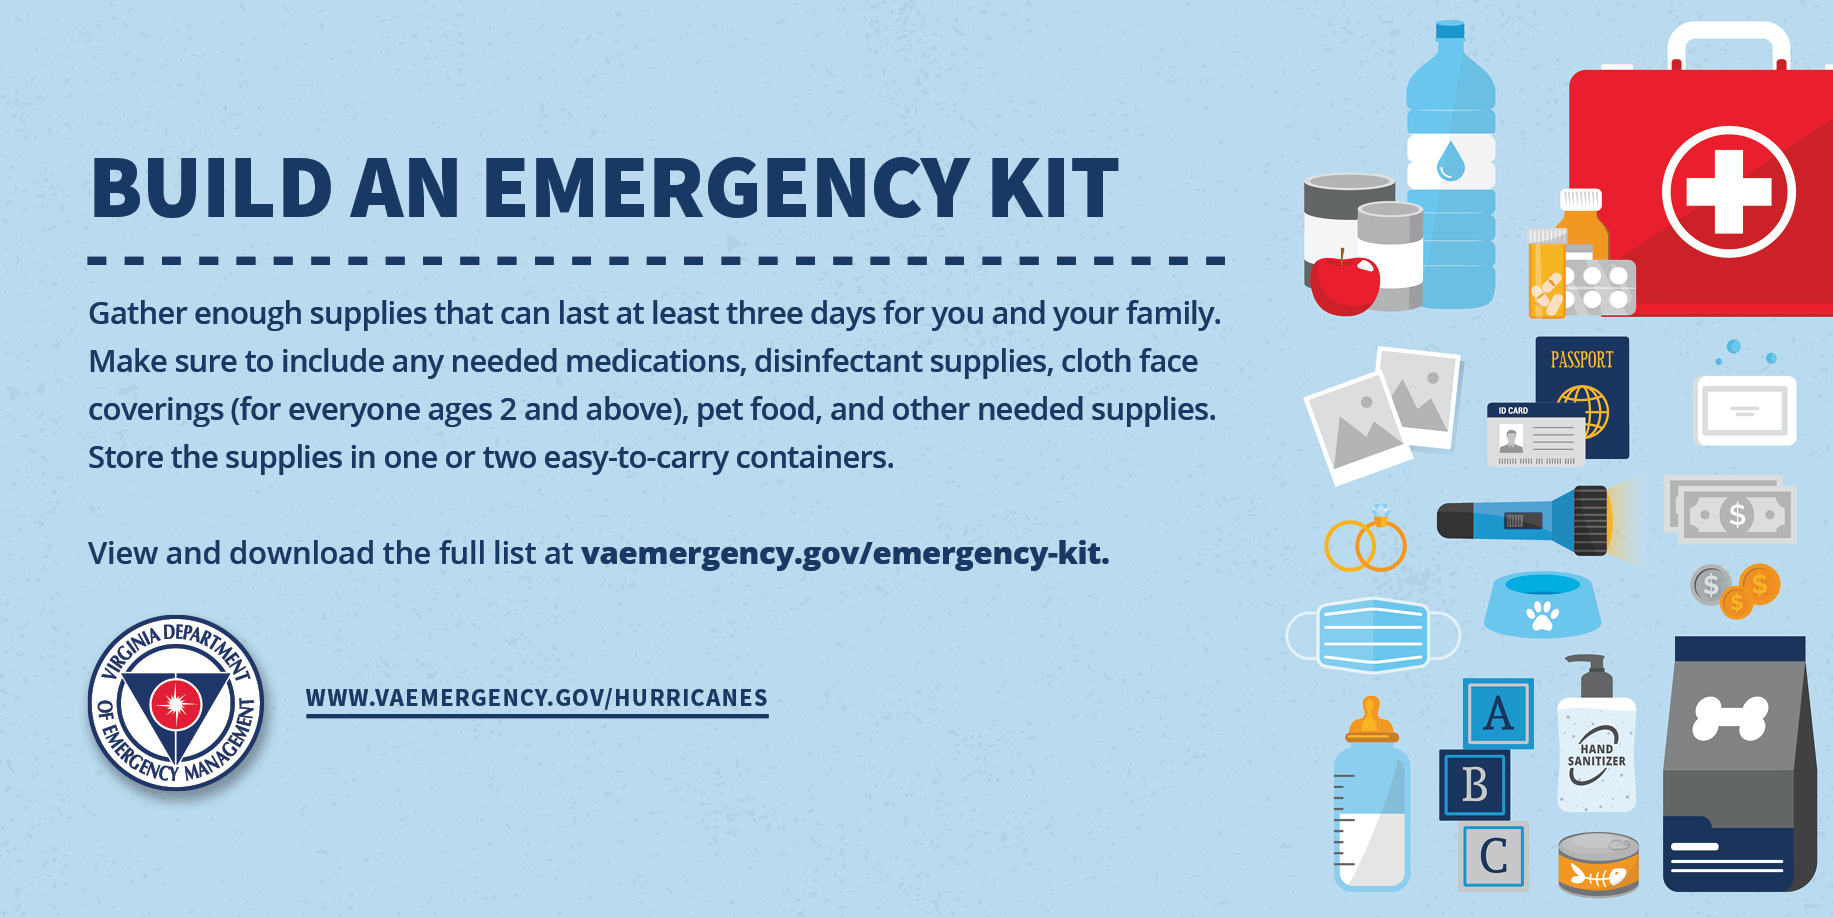 Here's how to build your own emergency kit